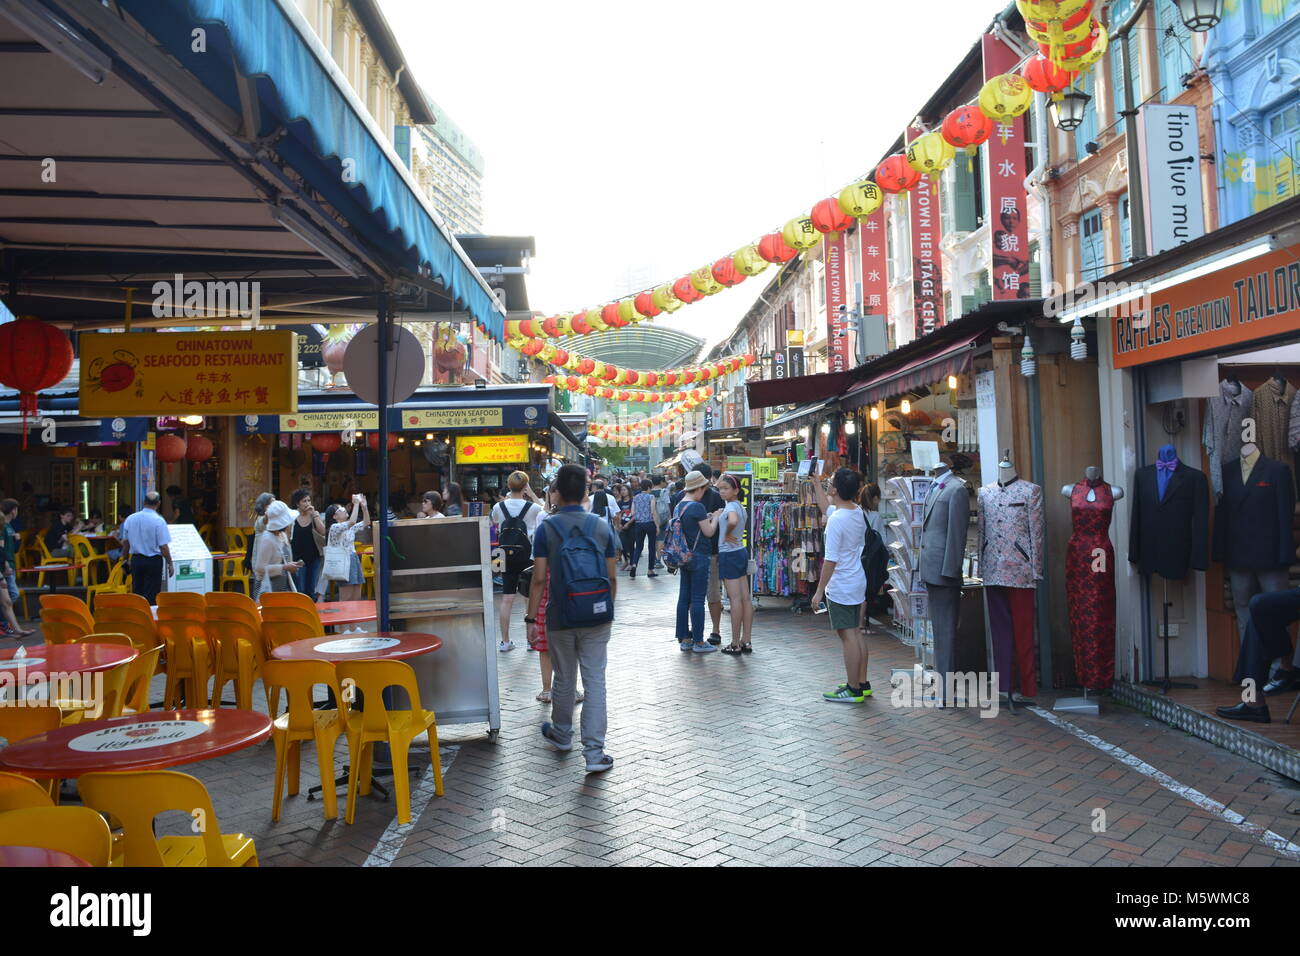 Street view of China town in Singapore Stock Photo